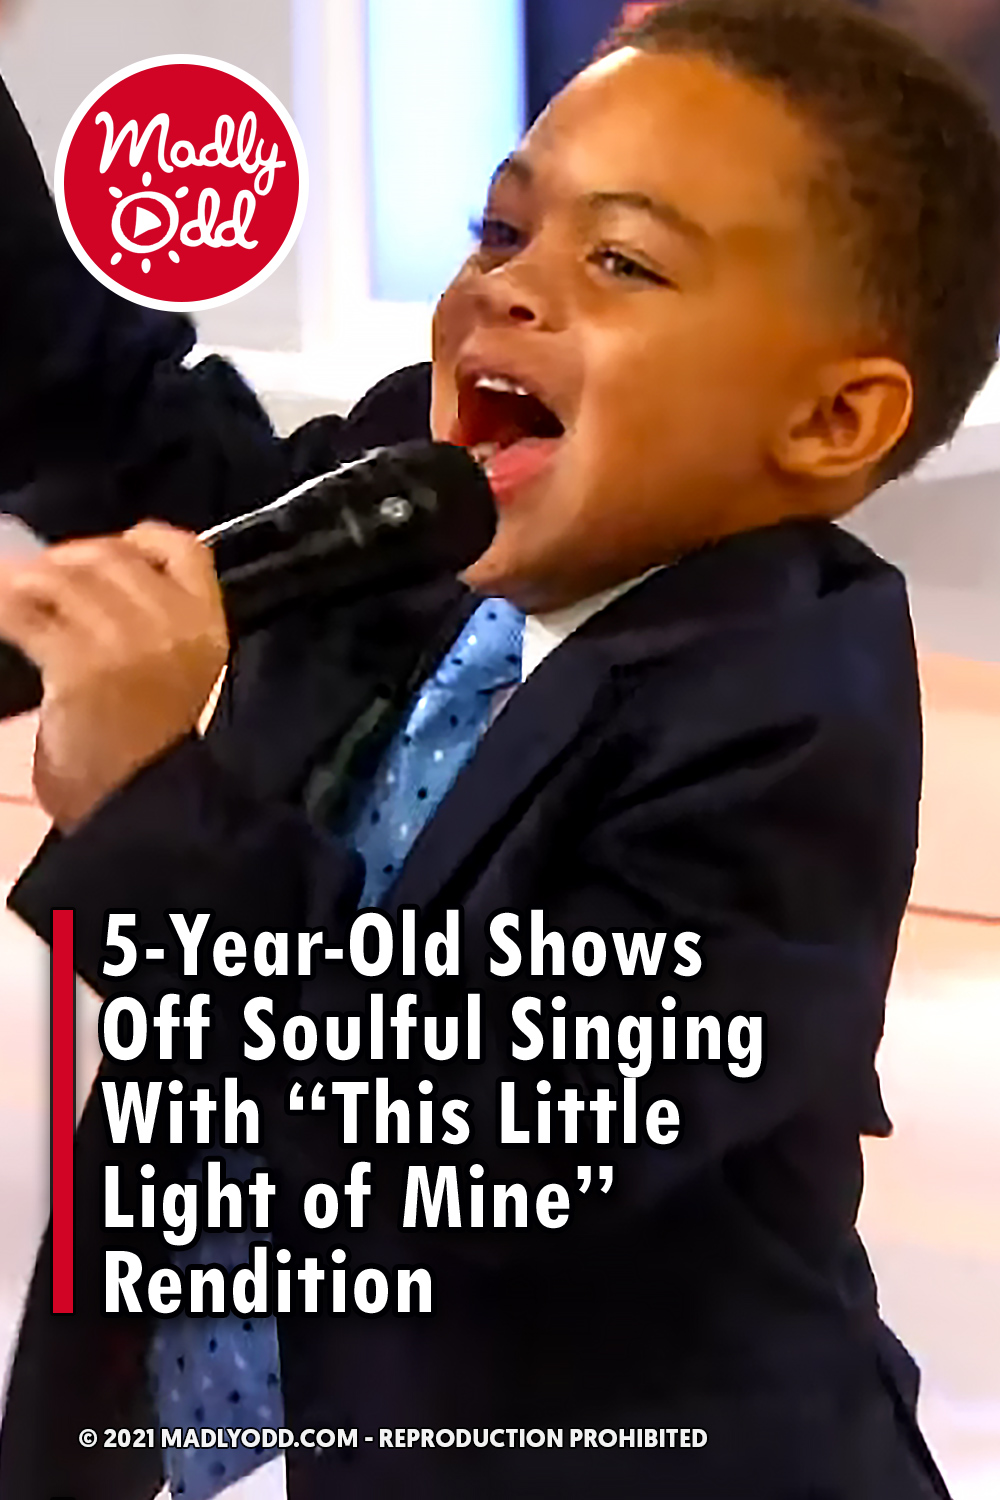 5-Year-Old Shows Off Soulful Singing With “This Little Light of Mine” Rendition